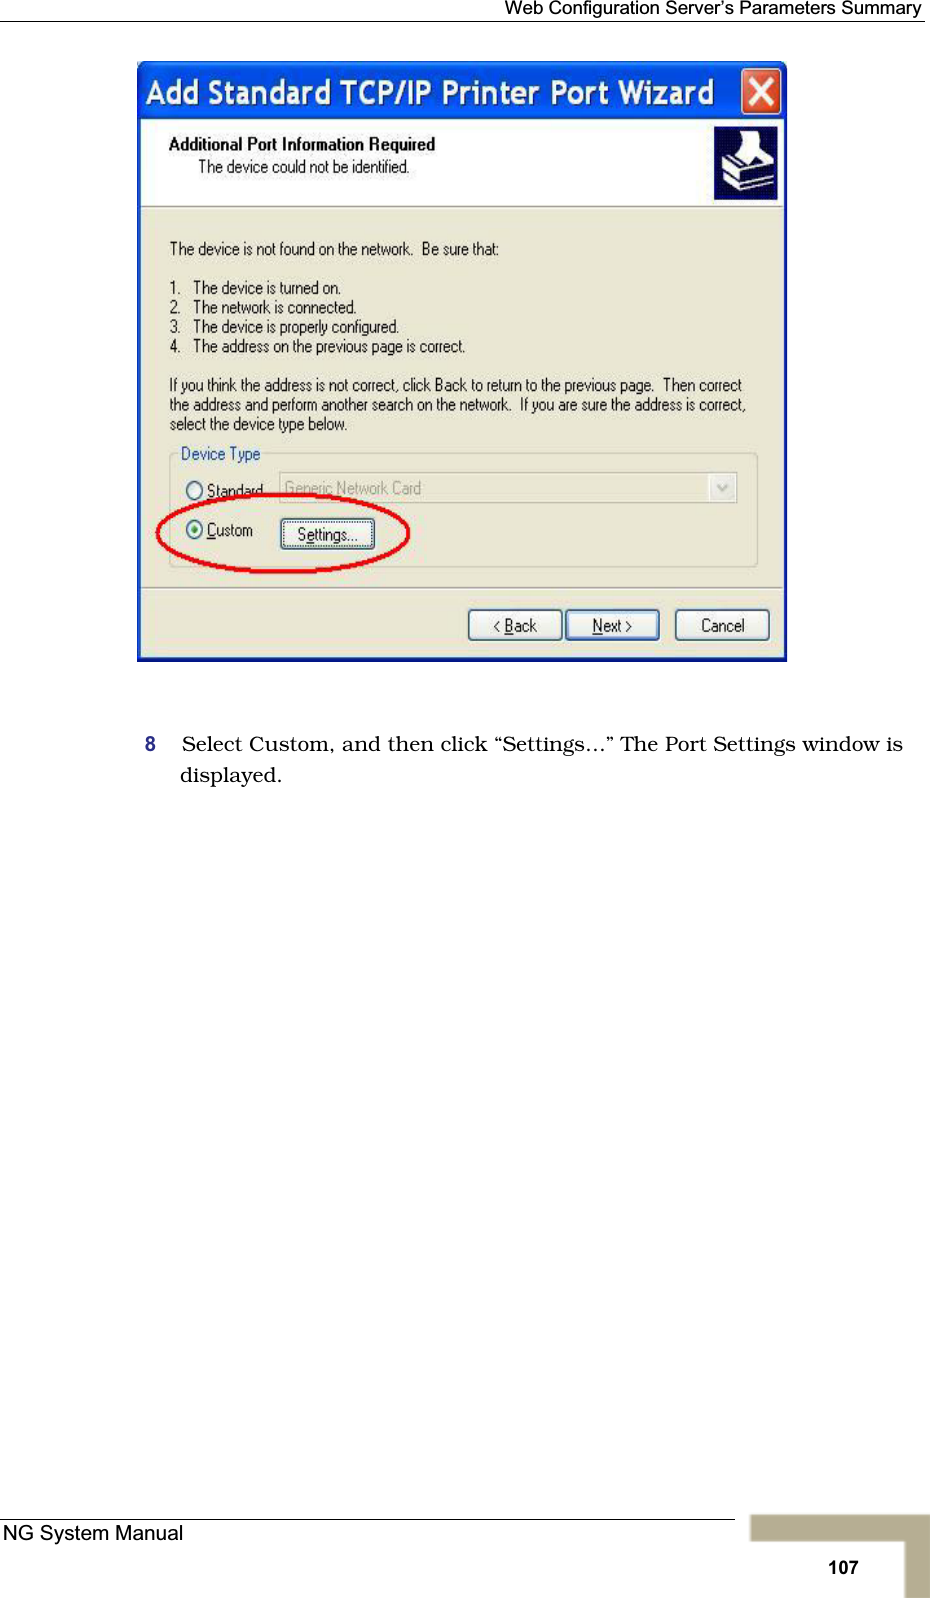 Web Configuration Server’s Parameters Summary8Select Custom, and then click “Settings…” The Port Settings window isdisplayed.NG System Manual107